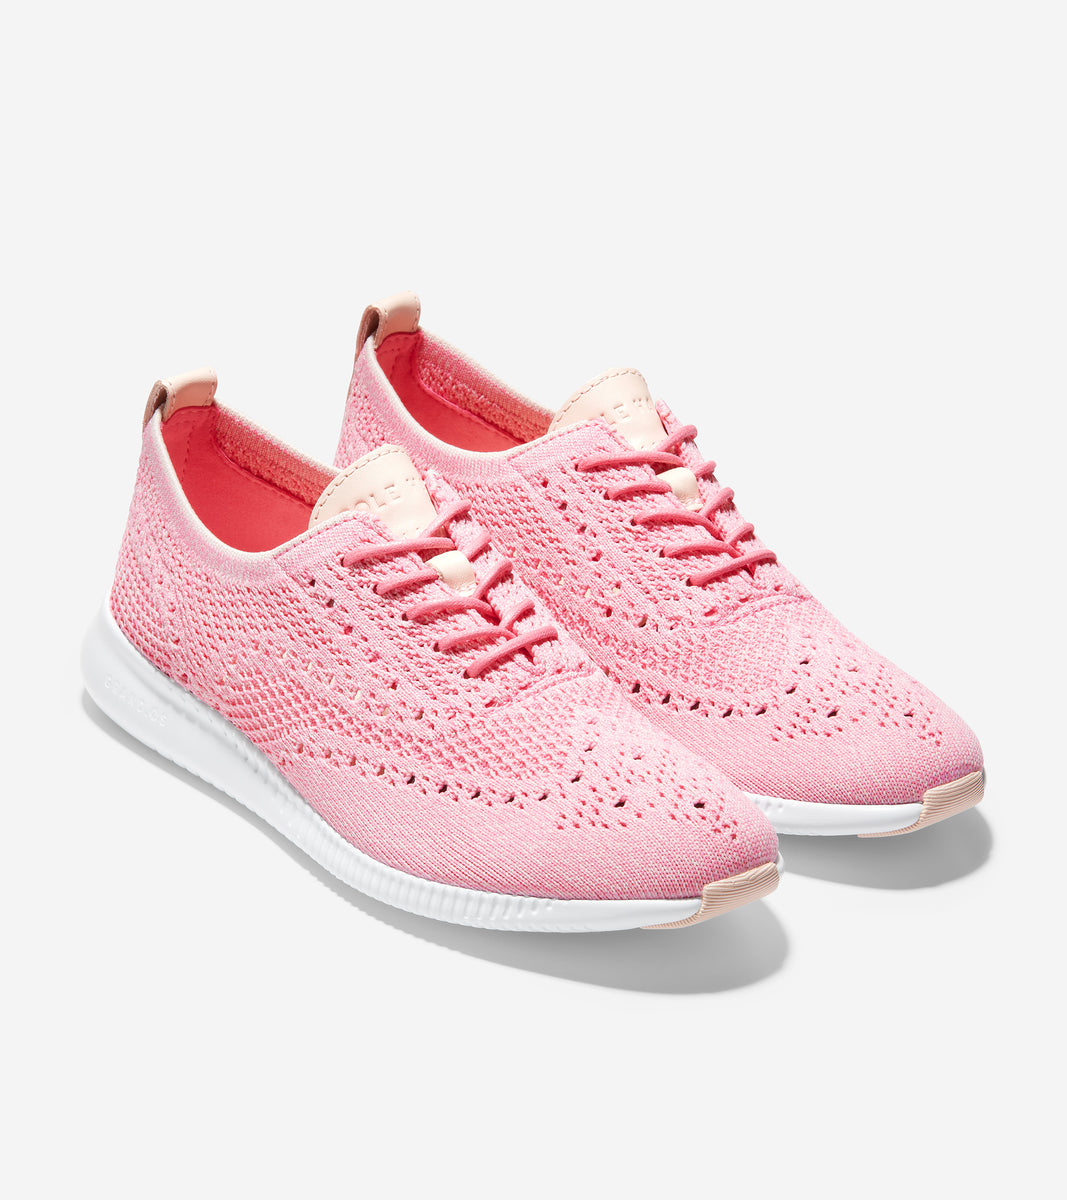 ColeHaan-2.ZERØGRAND Oxford-w23326-Tropical Pink-Clay Pink Stitchlite™